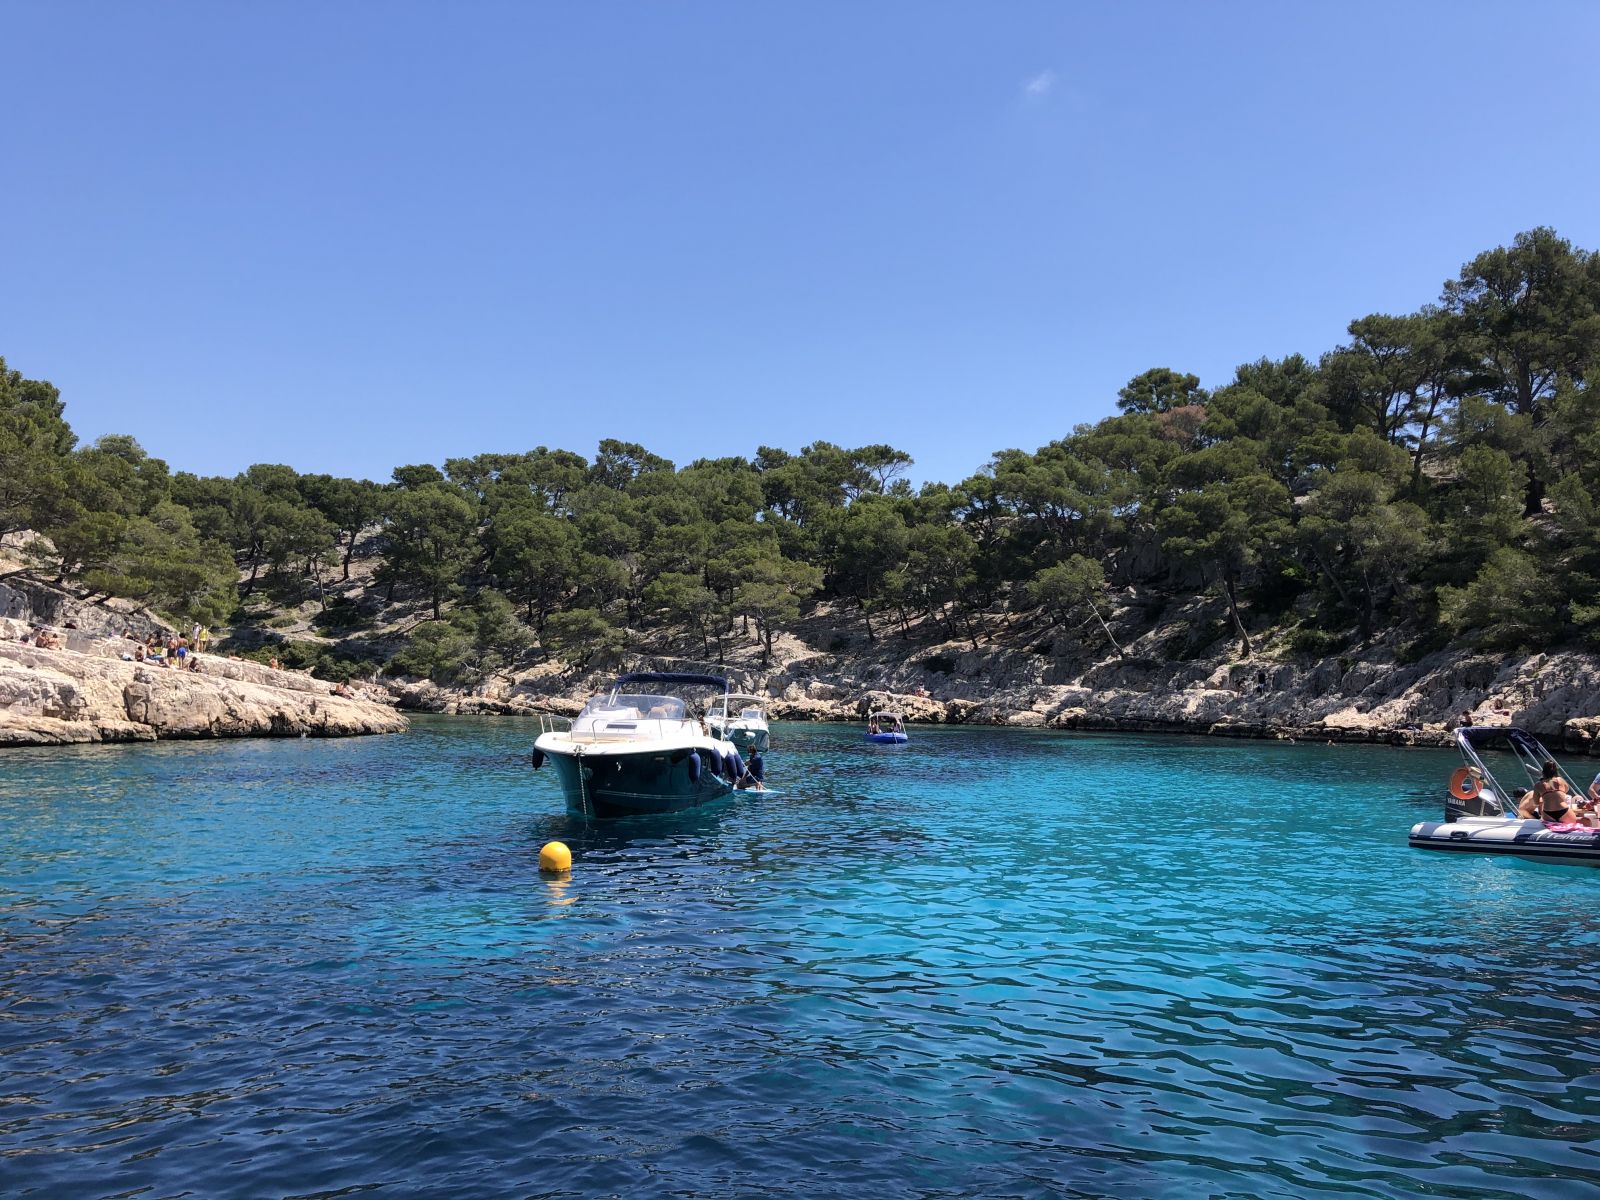 Entrance to the Port Pin calanque